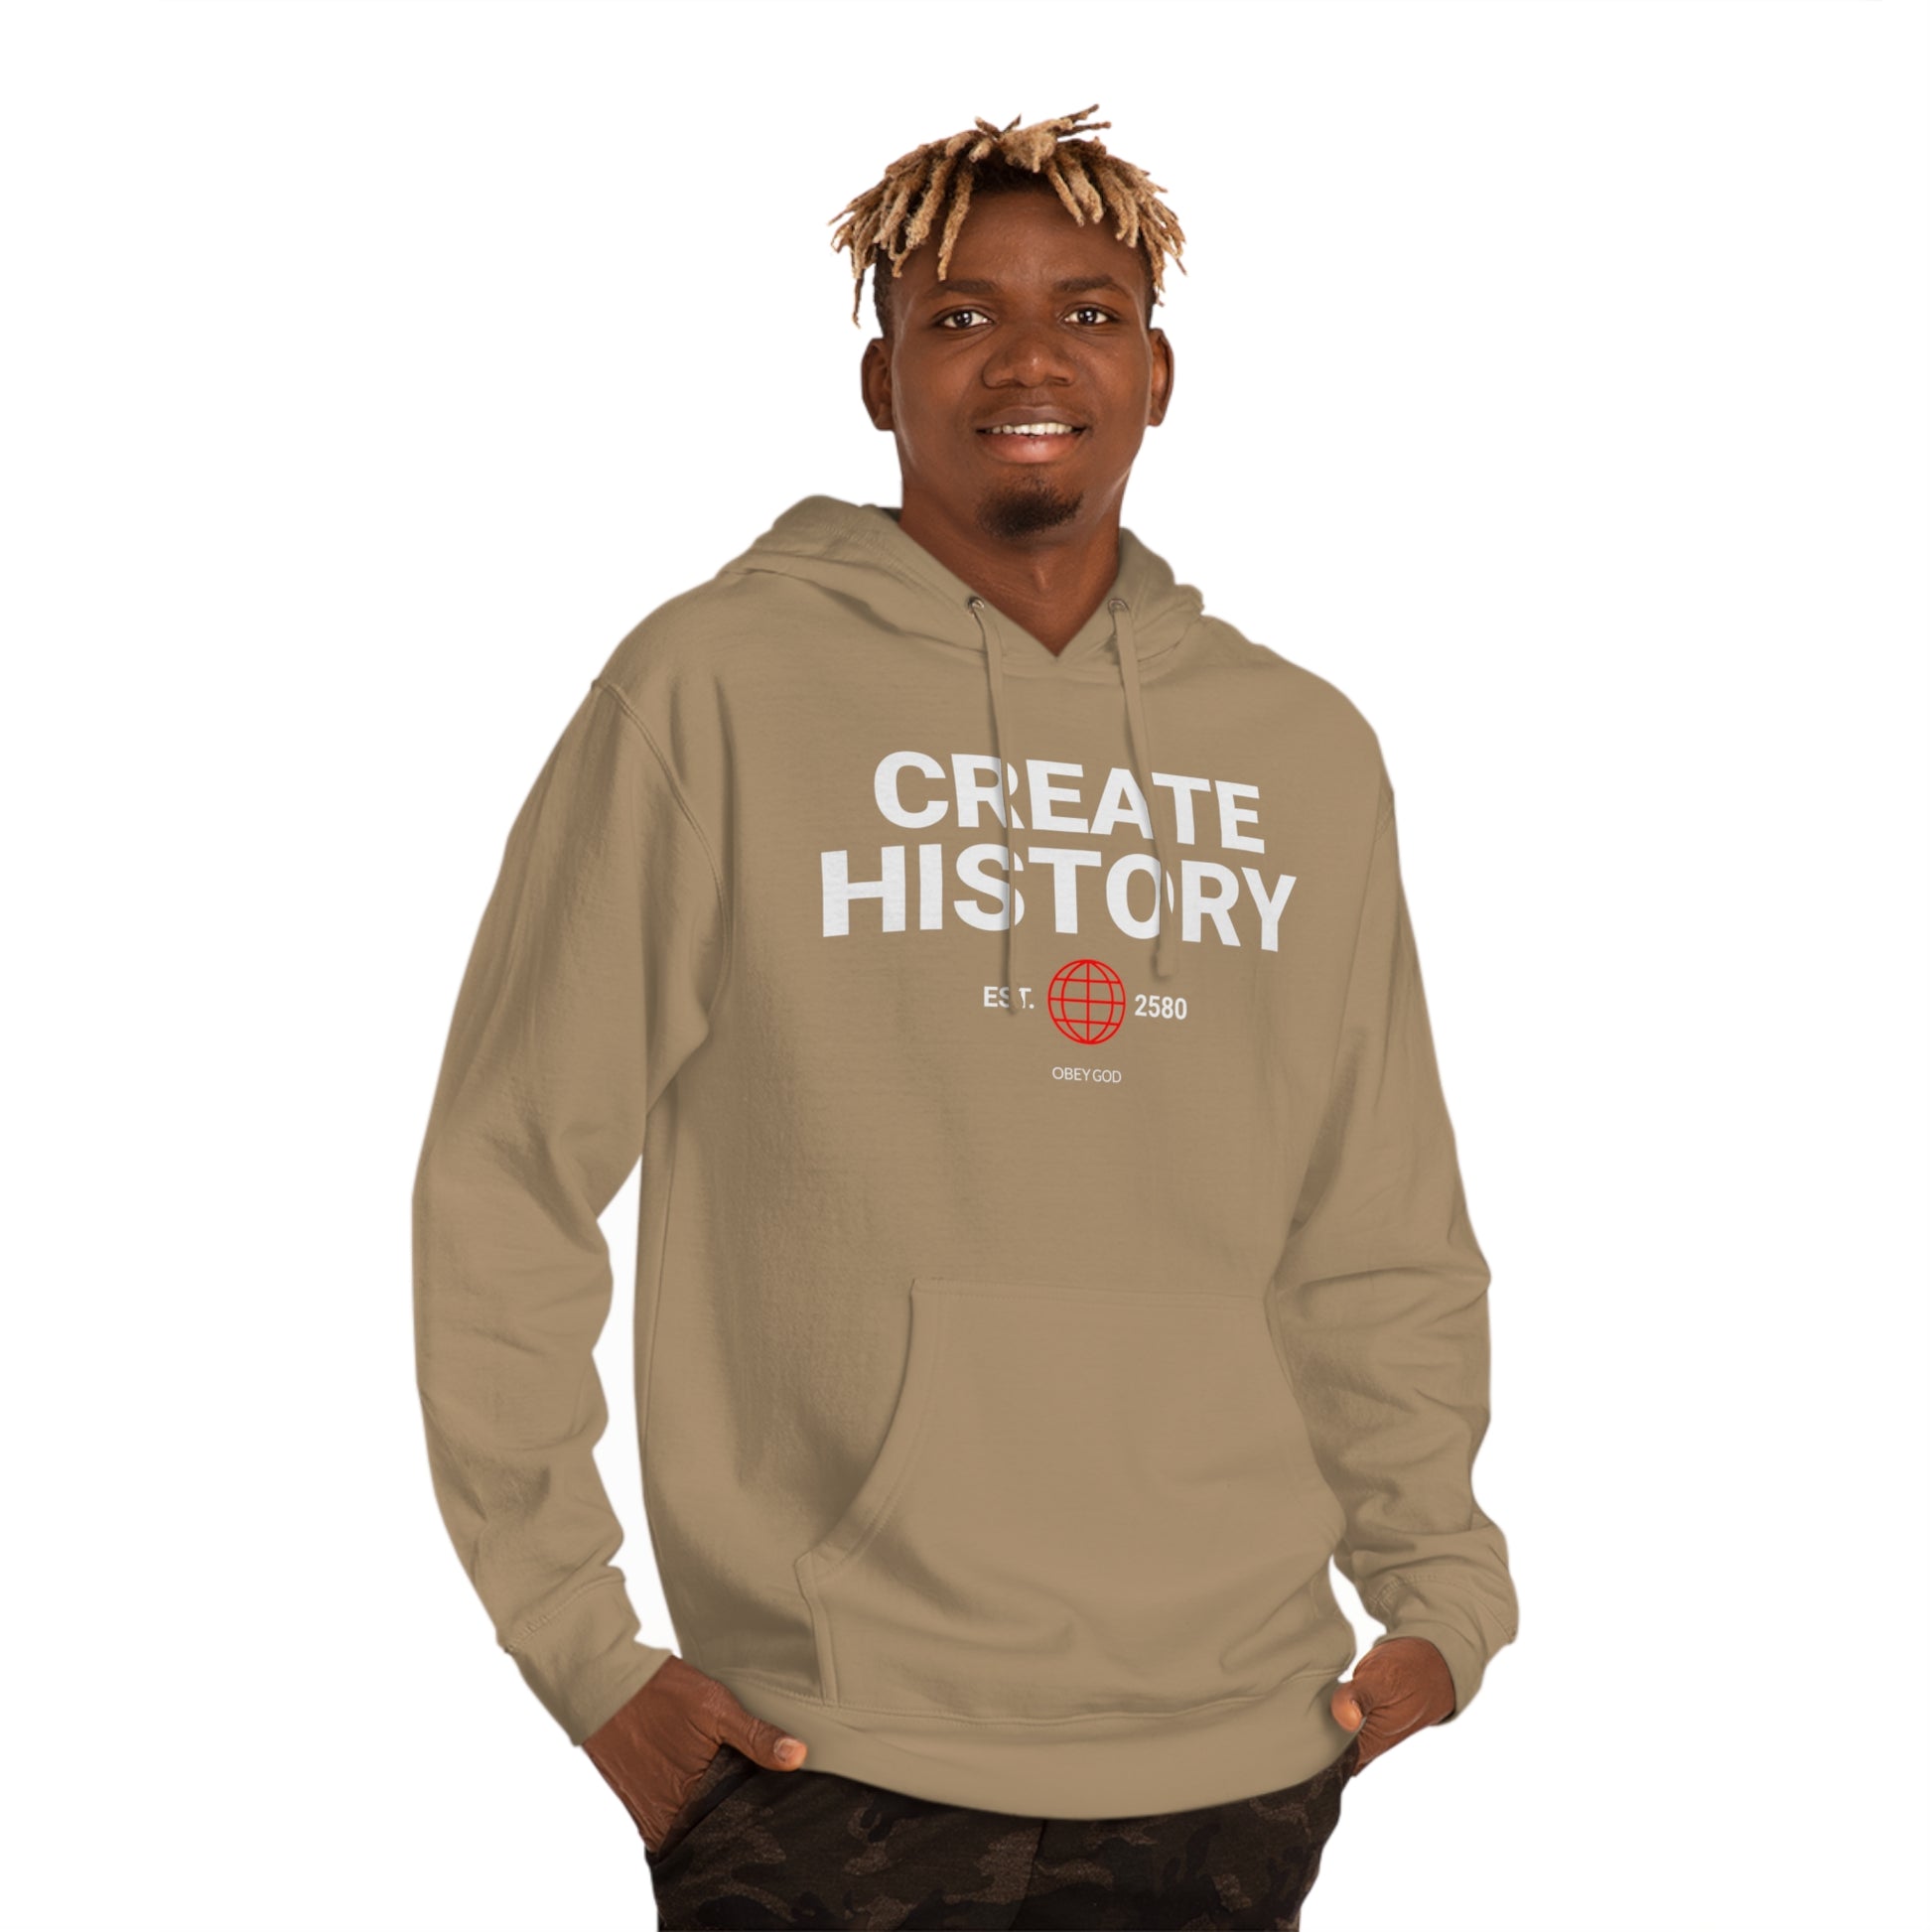 Elevate Your Style with our Red World Logo Create History Hoodie! Stand out in comfort and confidence with this bold statement piece. Perfect for those who want to make a fashion statement while embracing their unique identity. Order yours today and make history!